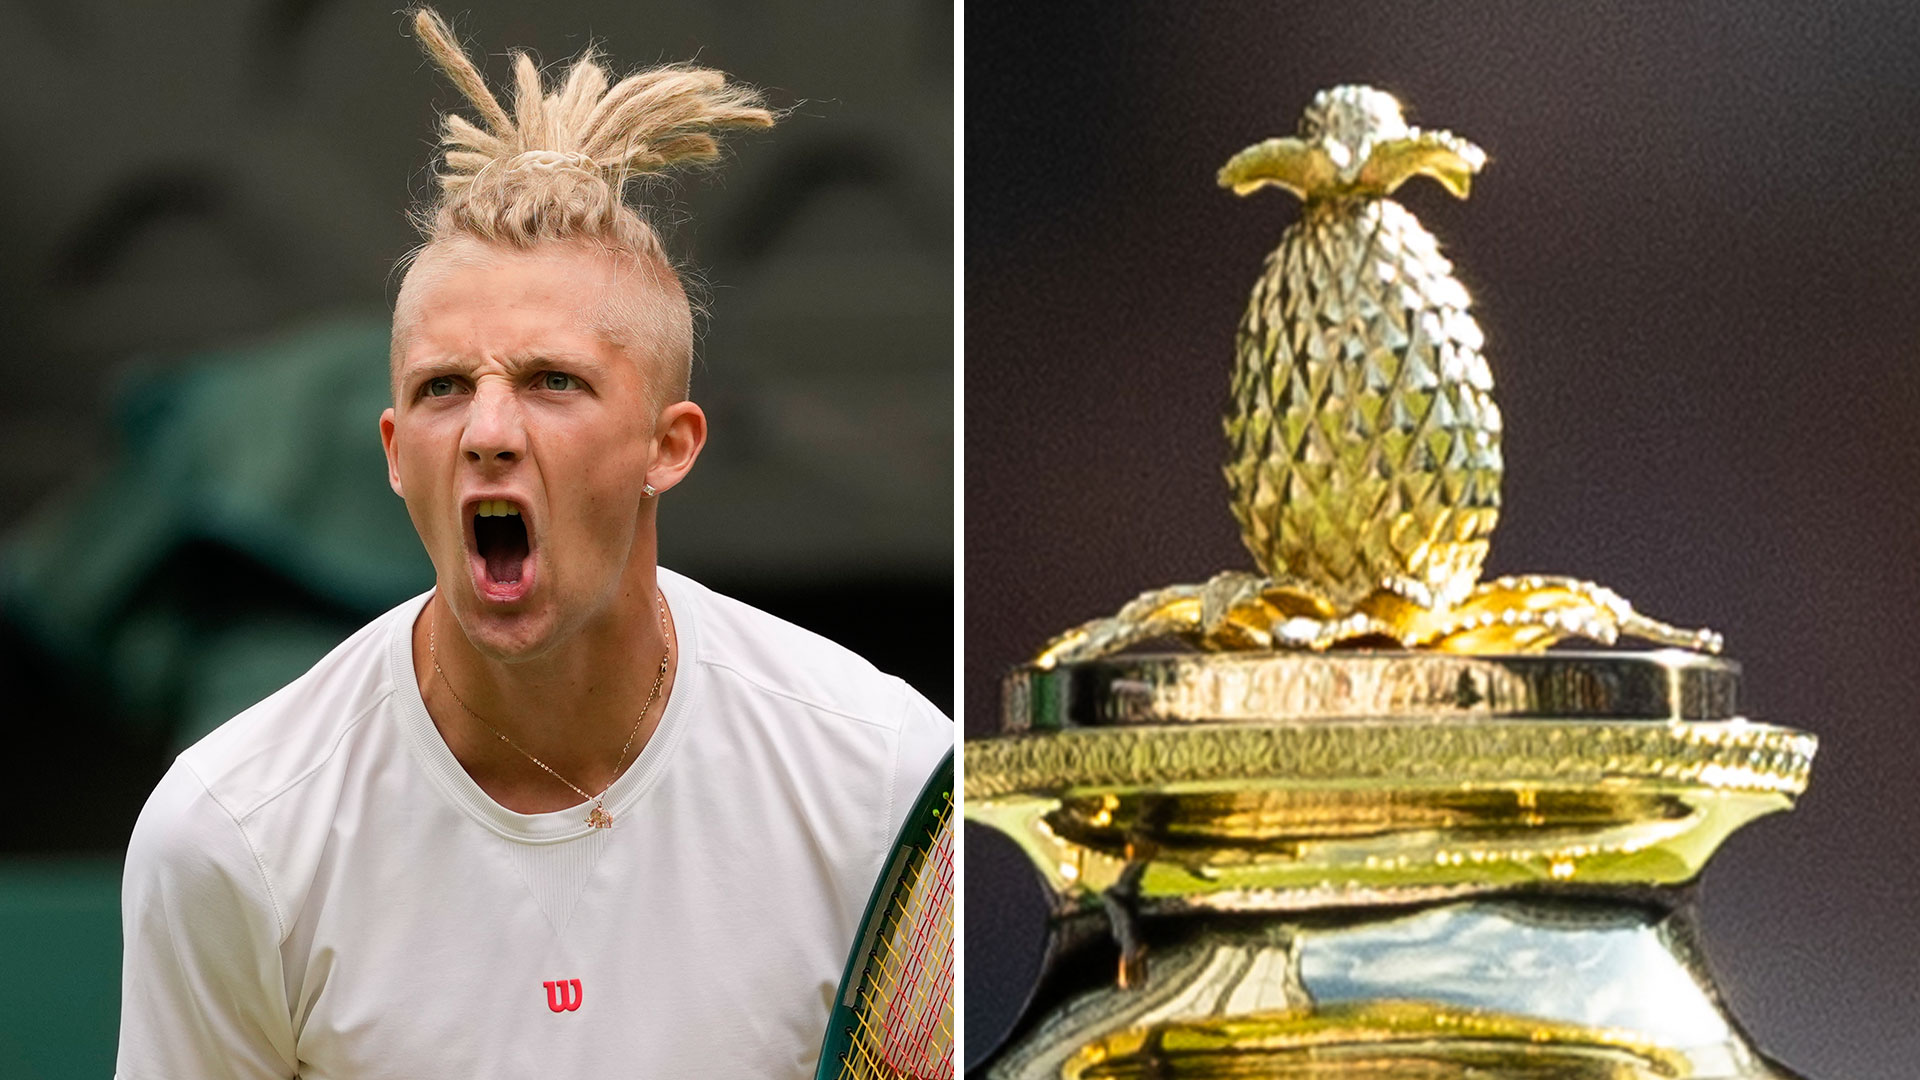 Mark Lajal's Grand Slam Debut: A Tribute to the Wimbledon Trophy?